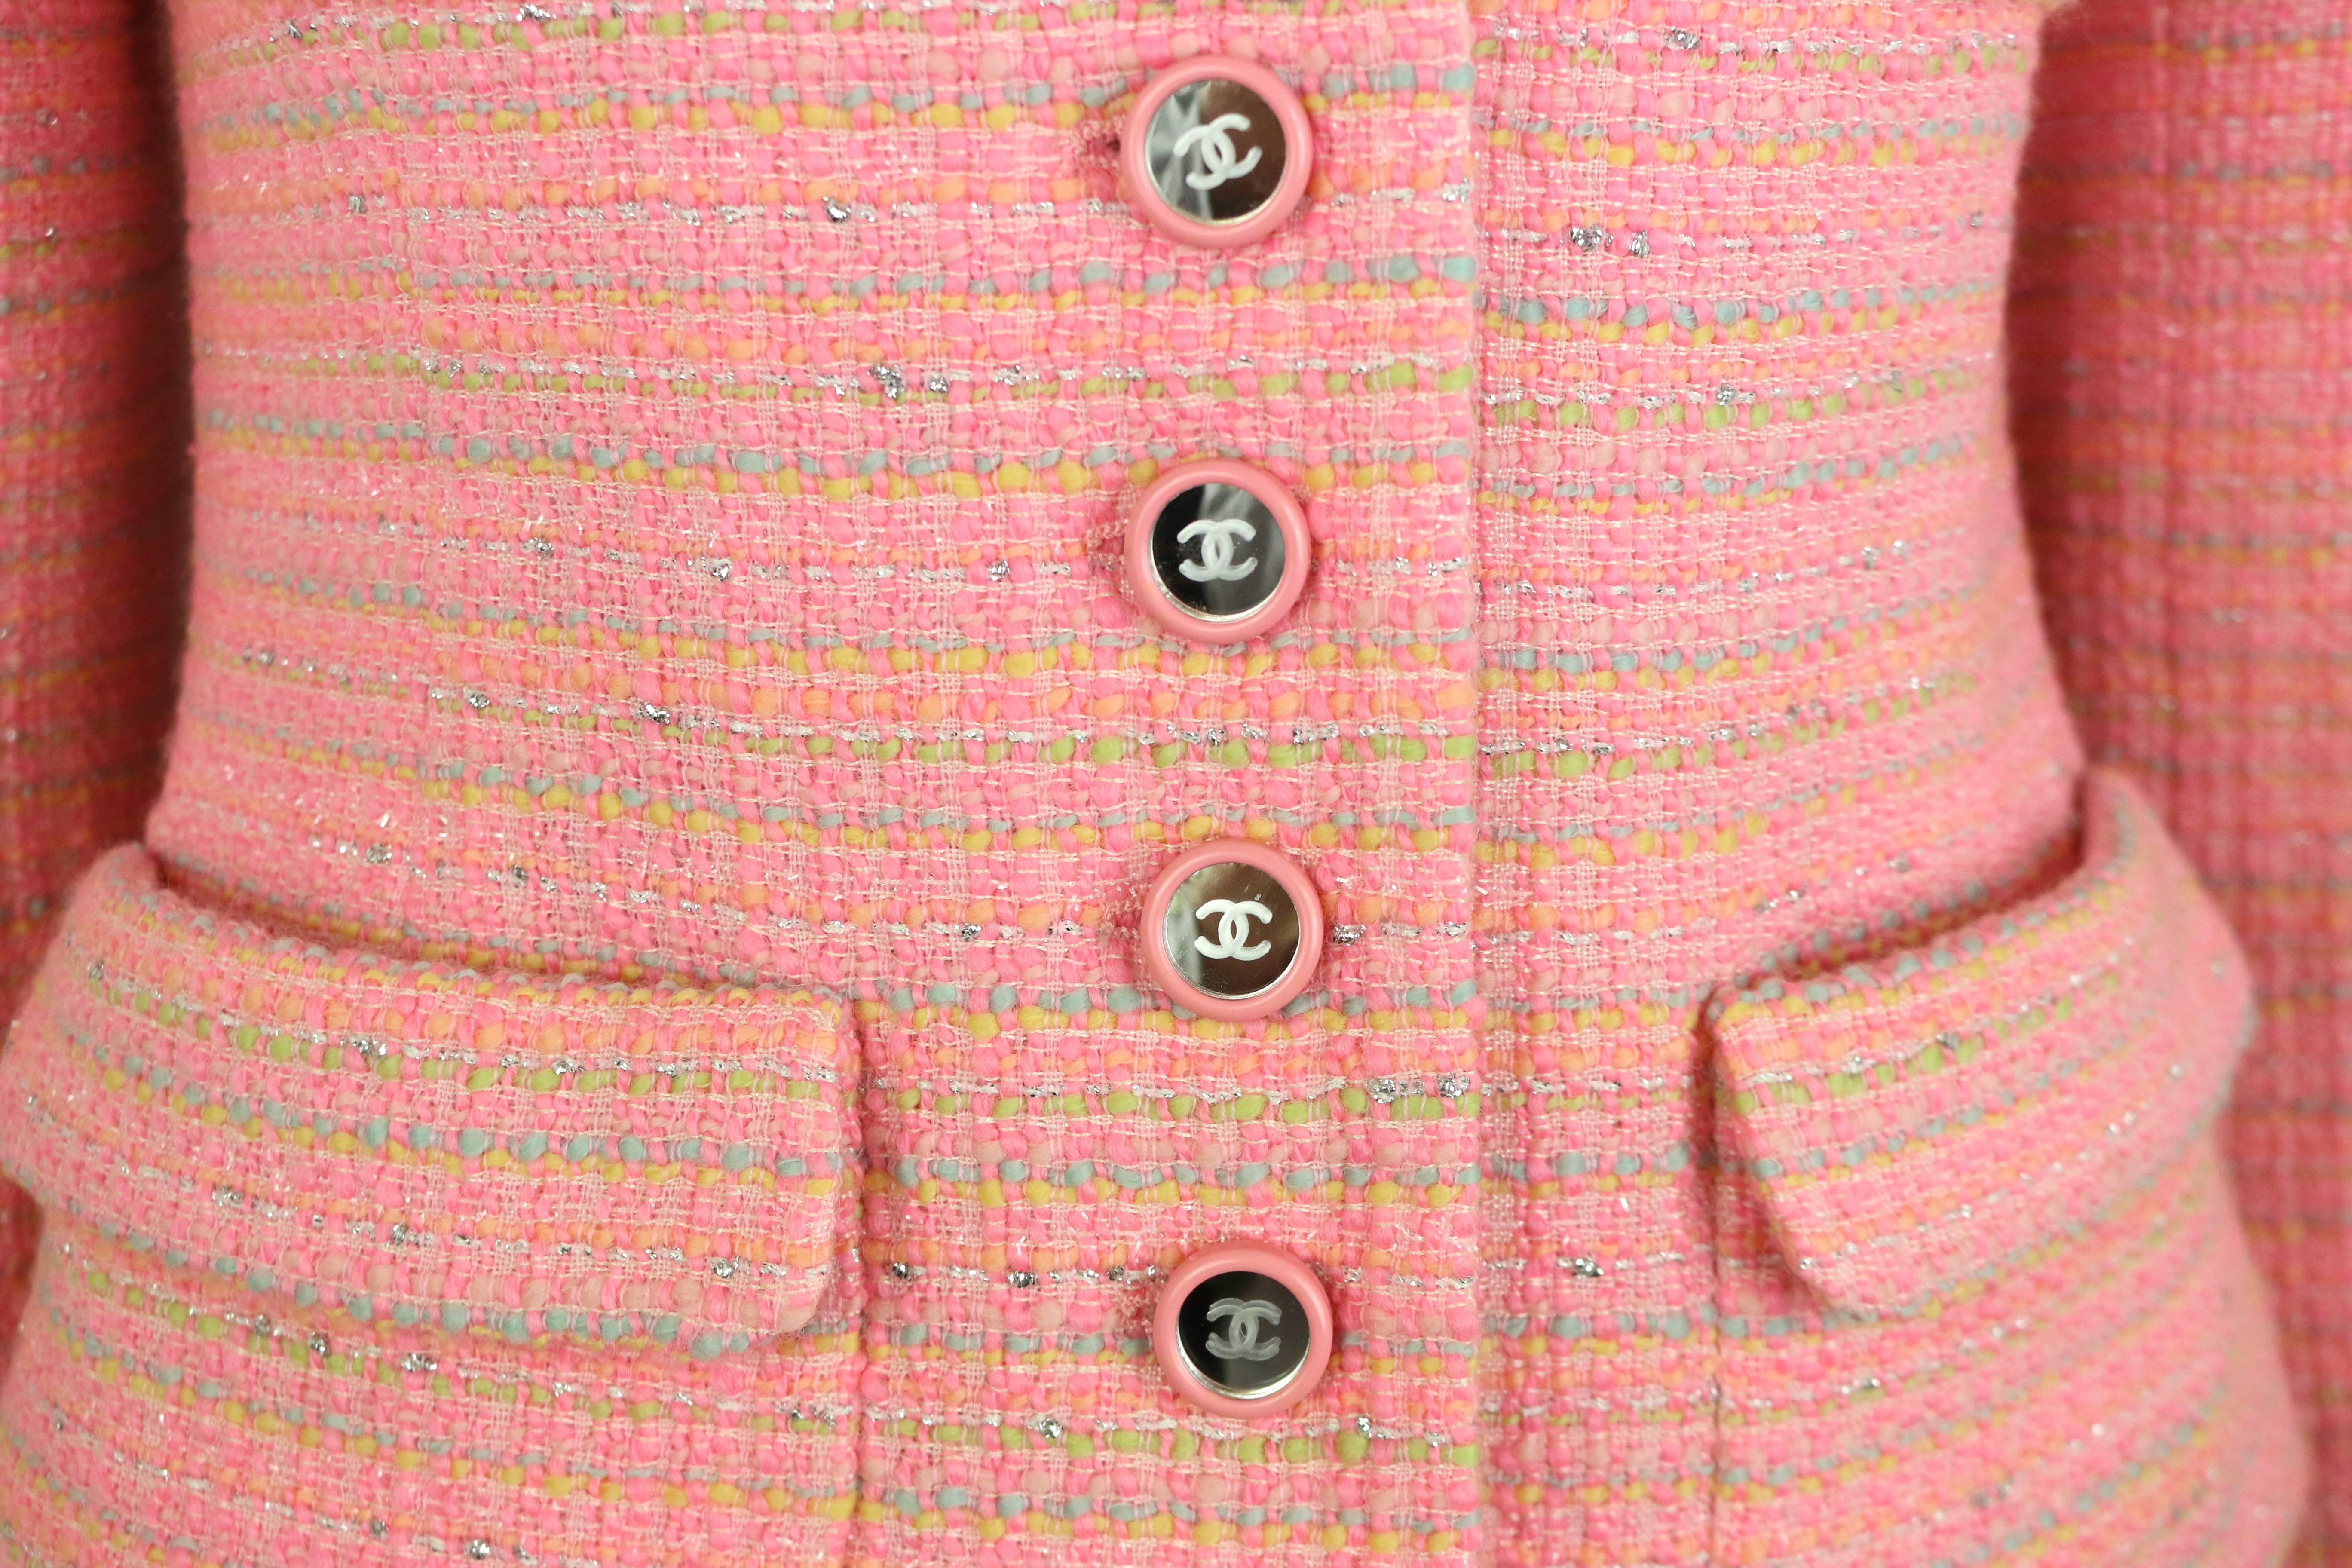 - Vintage Chanel multicolored(blue, green, yellow, orange, pink and silver aluminum paper like) tweed jacket and skirt ensemble from the year 1995C collection. 

- Featuring pink and mirror 